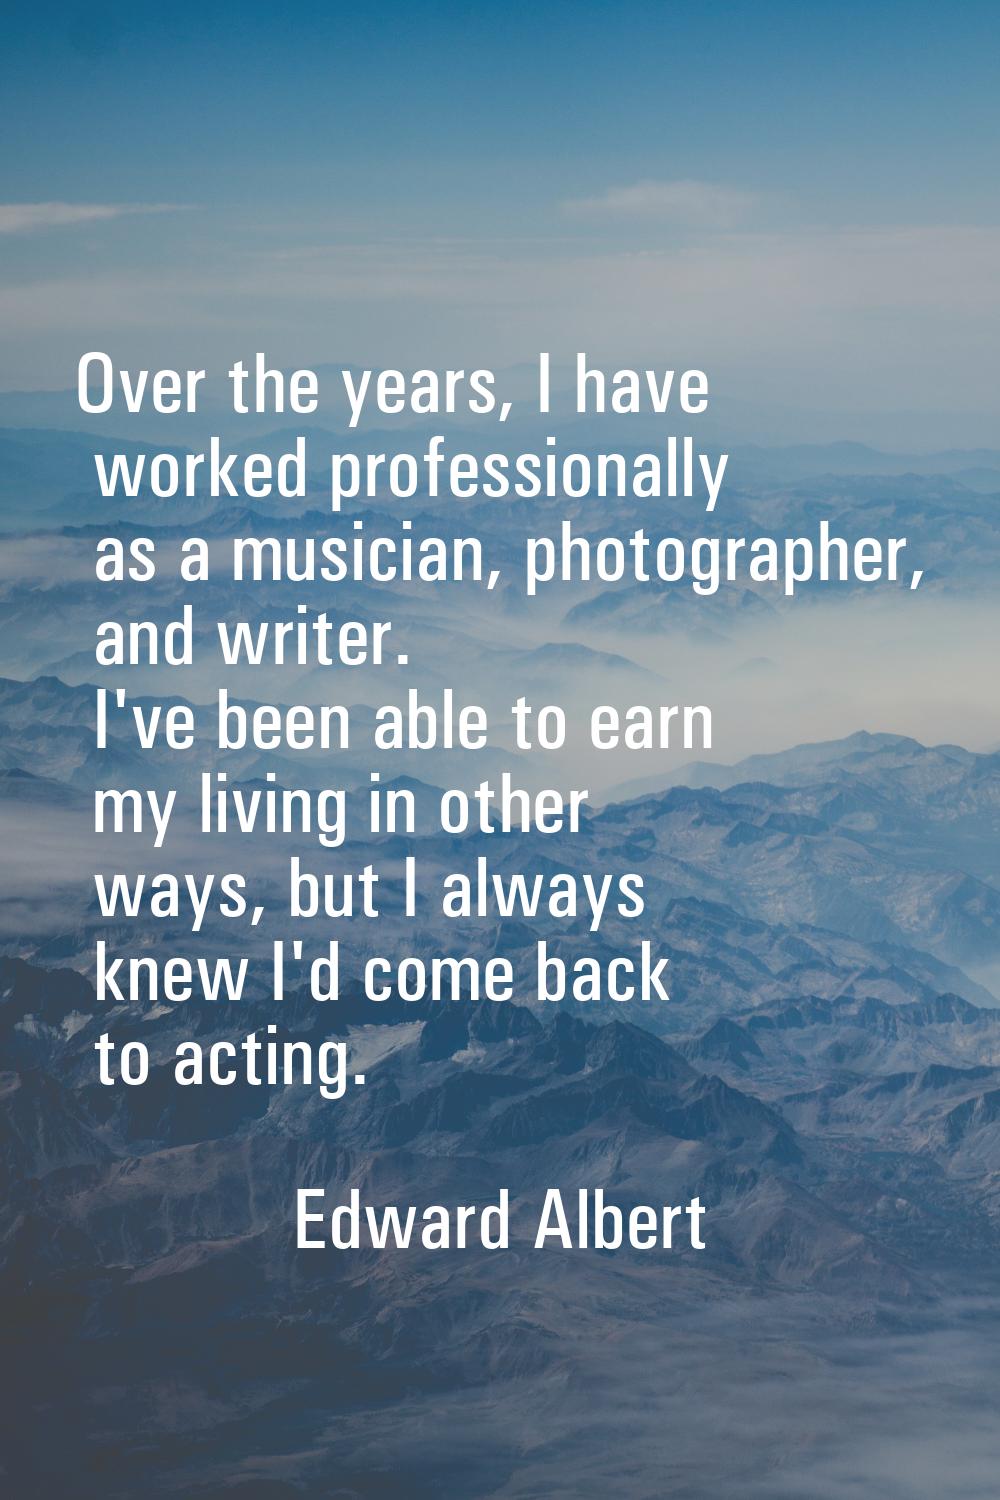 Over the years, I have worked professionally as a musician, photographer, and writer. I've been abl